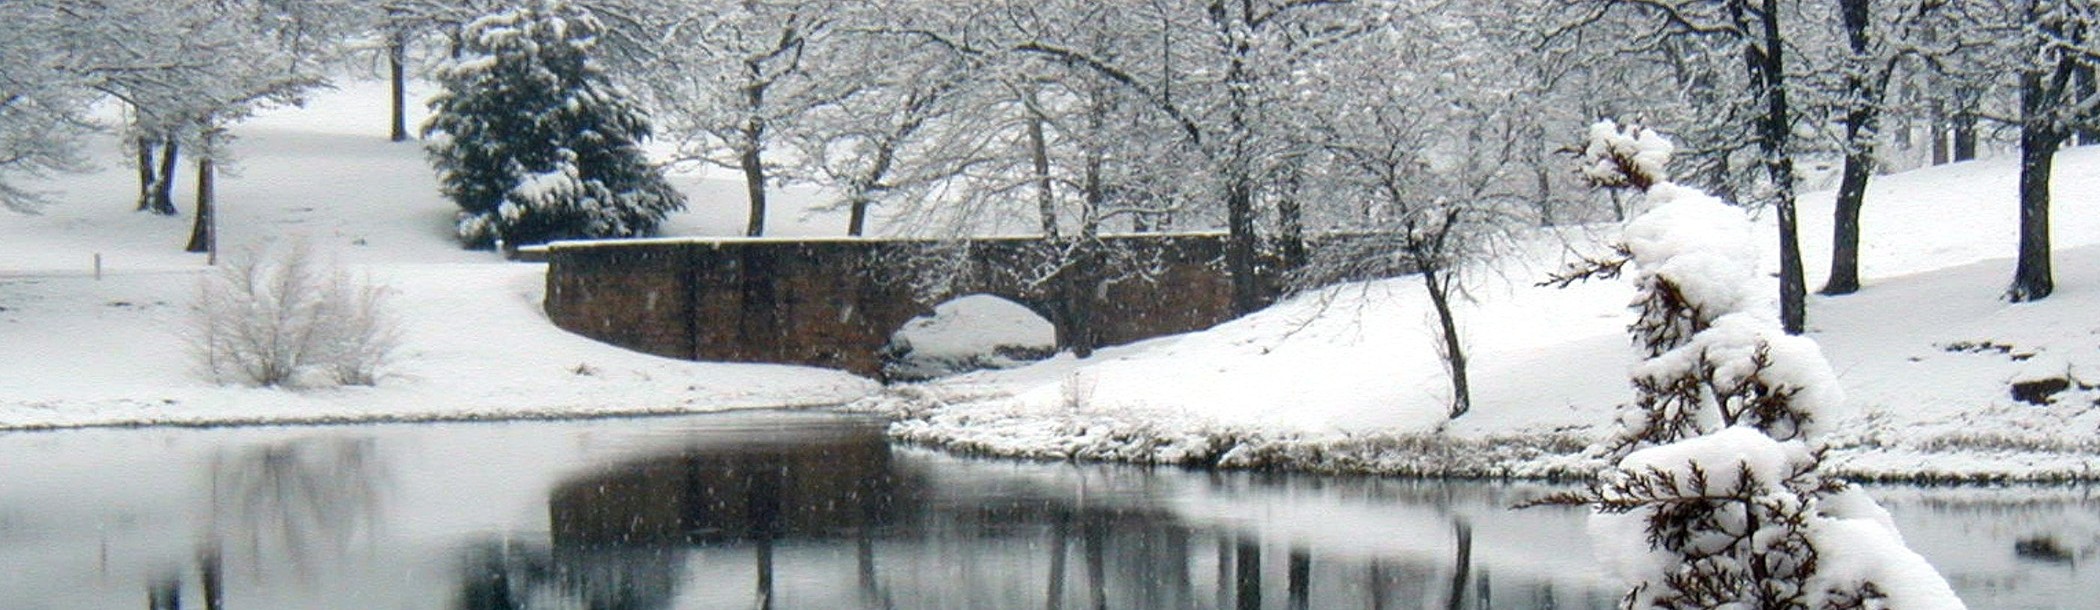 Bridge over a lake with surrounding area covered in snow.